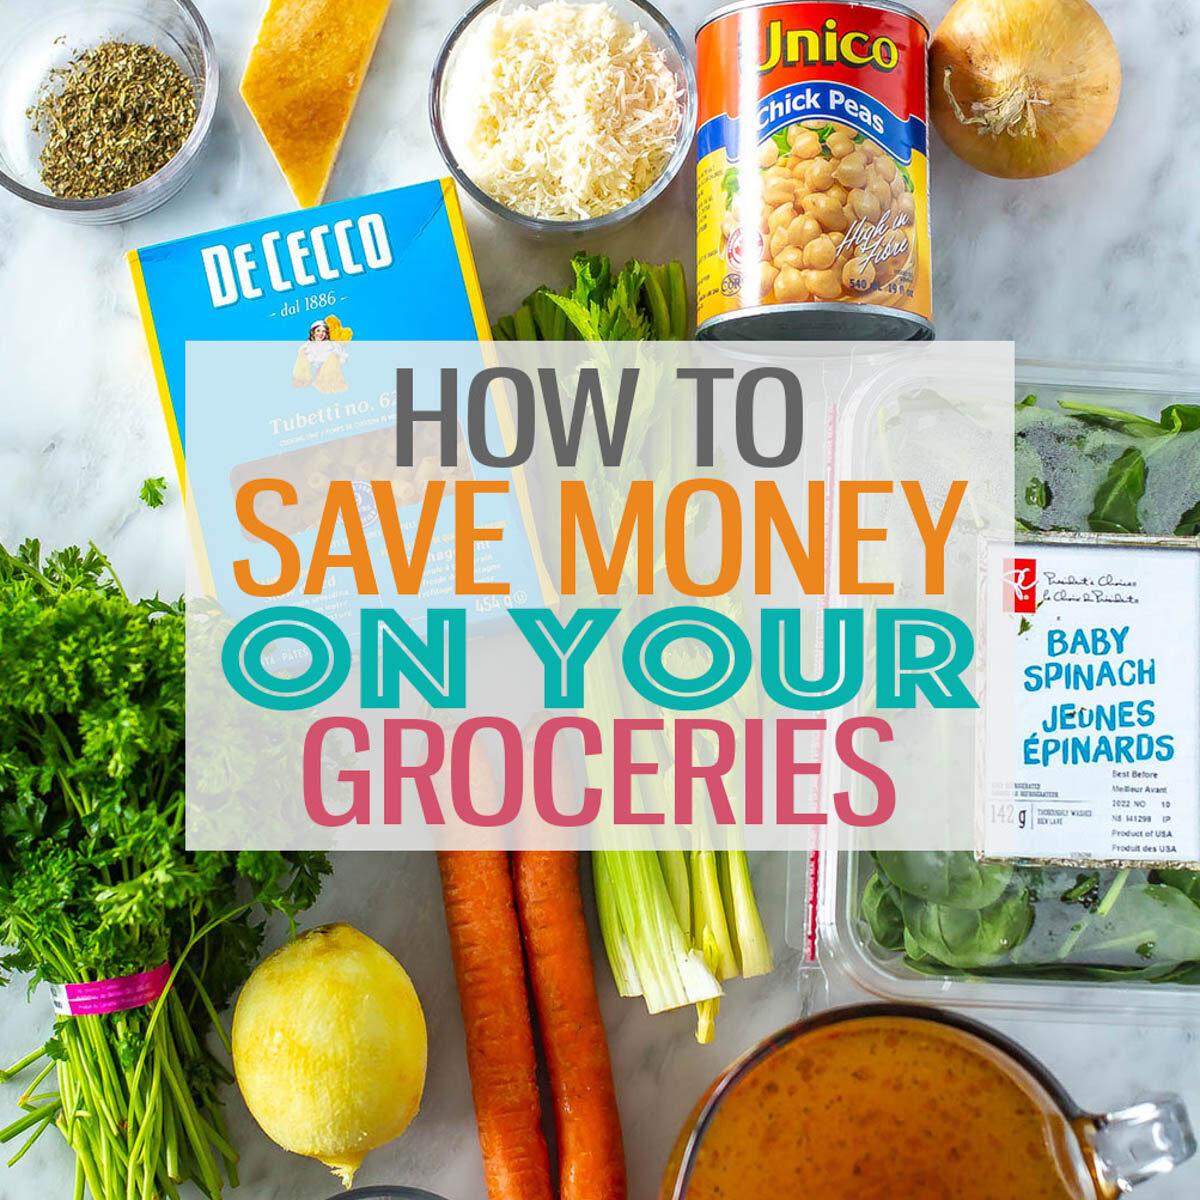 A counter with an assortment of groceries with the text "How to Save Money on Your Groceries" layered over top.